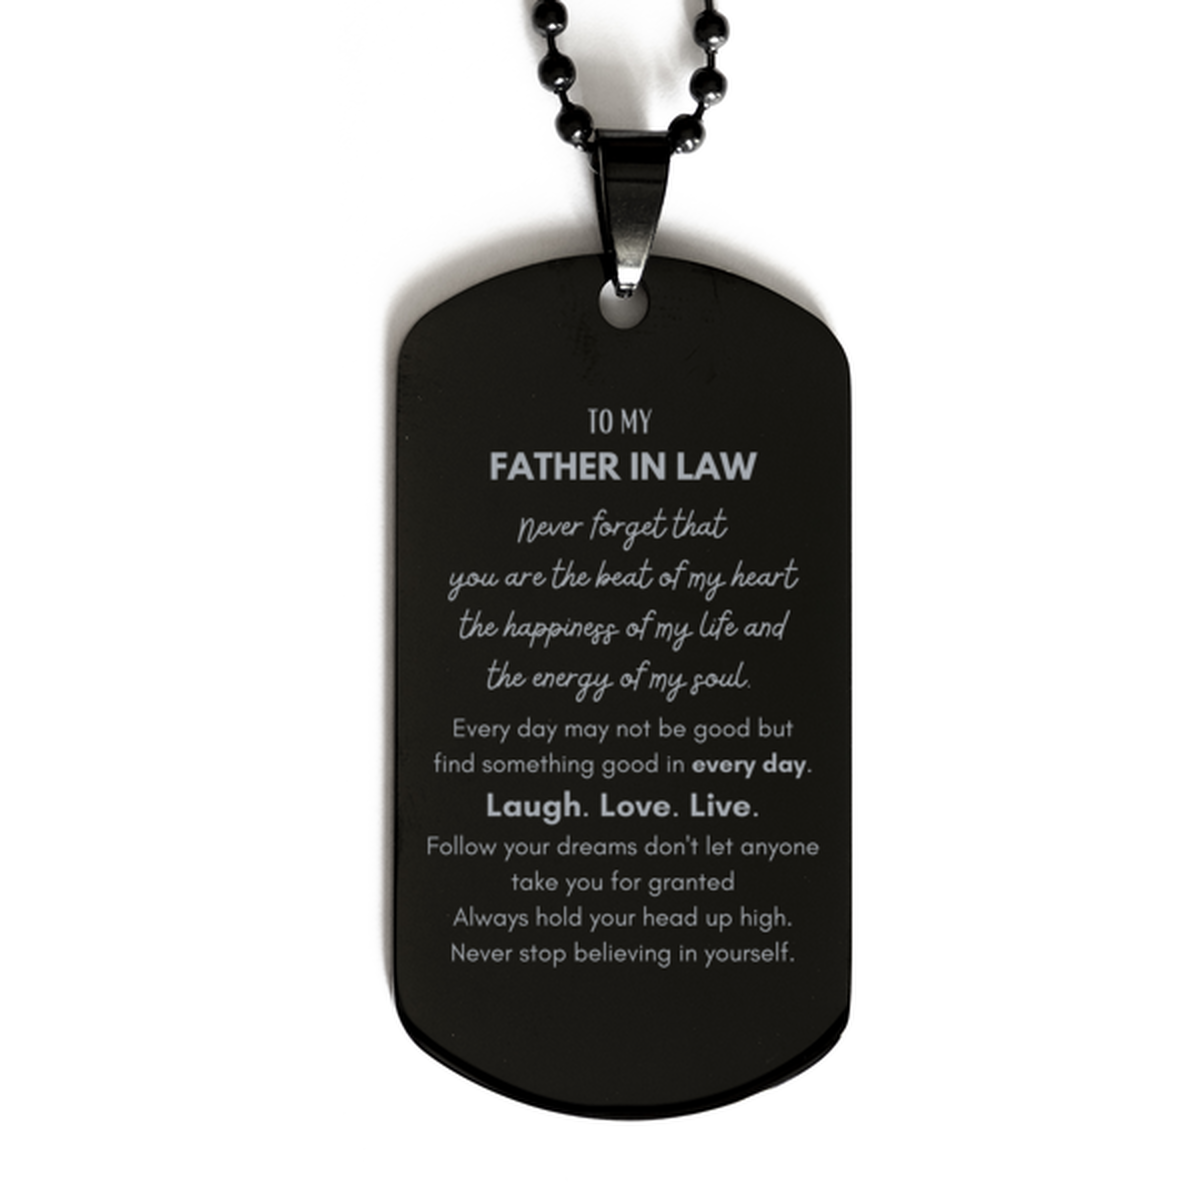 To My Father In Law Dogtag Gifts, Christmas Father In Law Black Dog Tag Present, Birthday Unique Motivational For Father In Law, To My Father In Law Never forget that you are the beat of my heart the happiness of my life and the energy of my soul